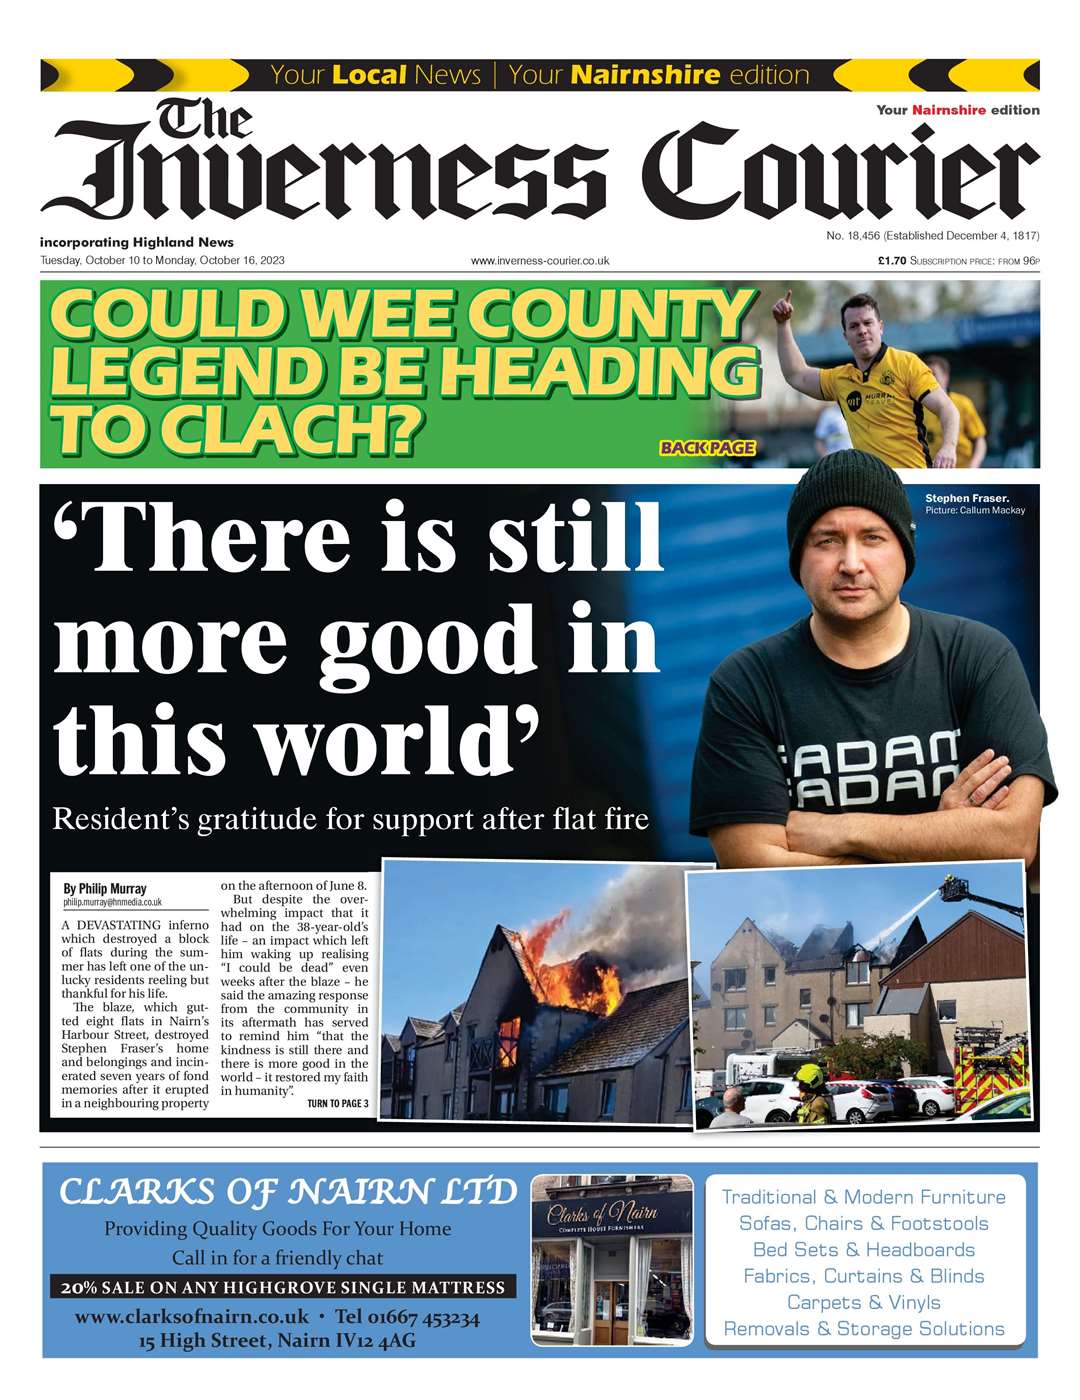 The Inverness Courier (Nairnshire edition), October 10, front page.